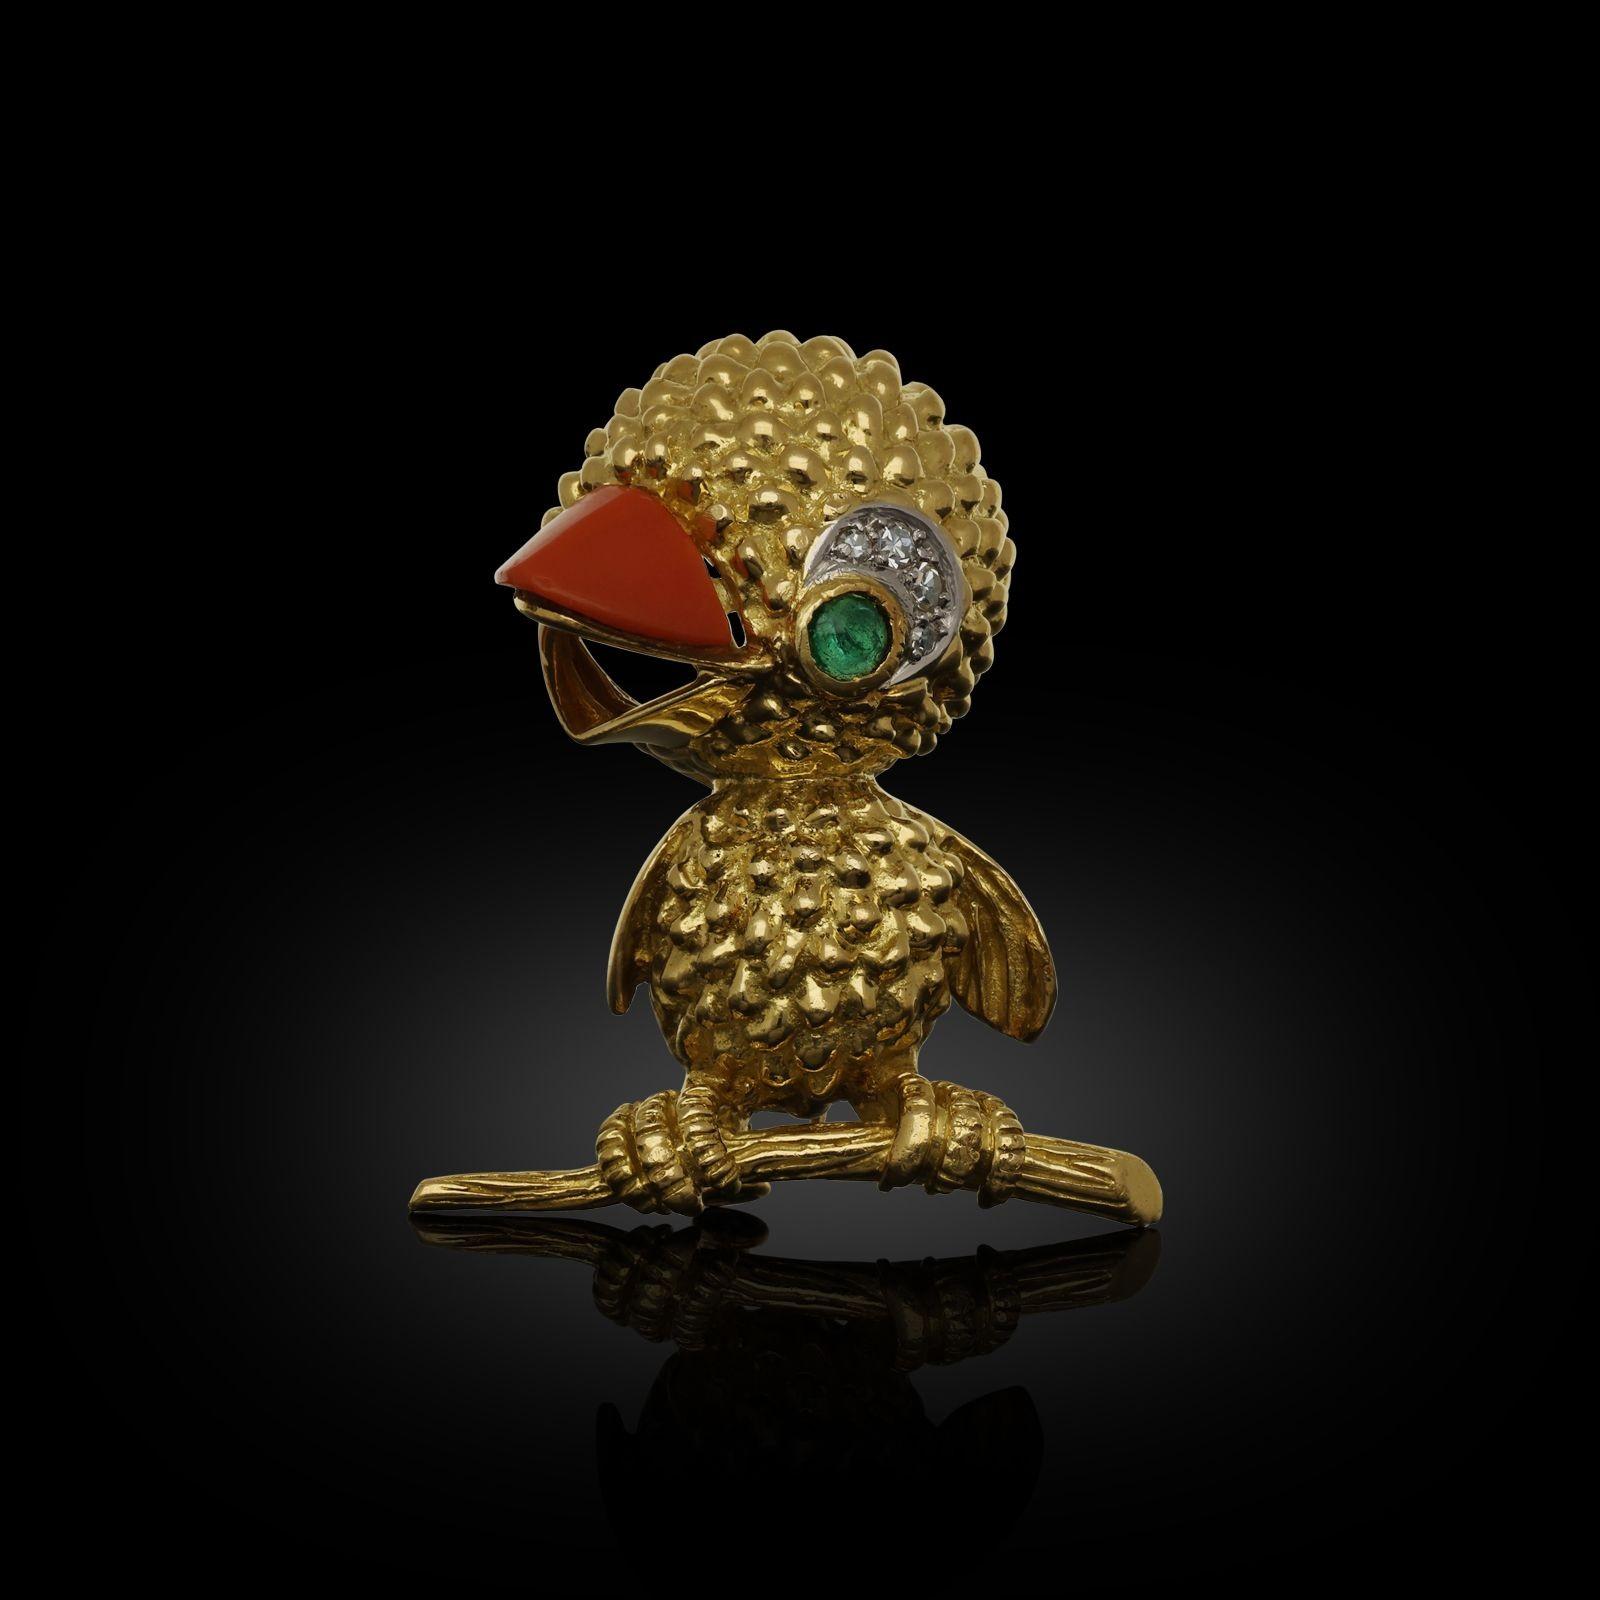 A charming gold and gem-set chick brooch by Jacques Lacloche c. 1950s, the chick depicted standing on a branch, the body in heavily textured 18ct yellow gold, the open beak set with a piece of polished coral, the eye with an emerald cabochon and